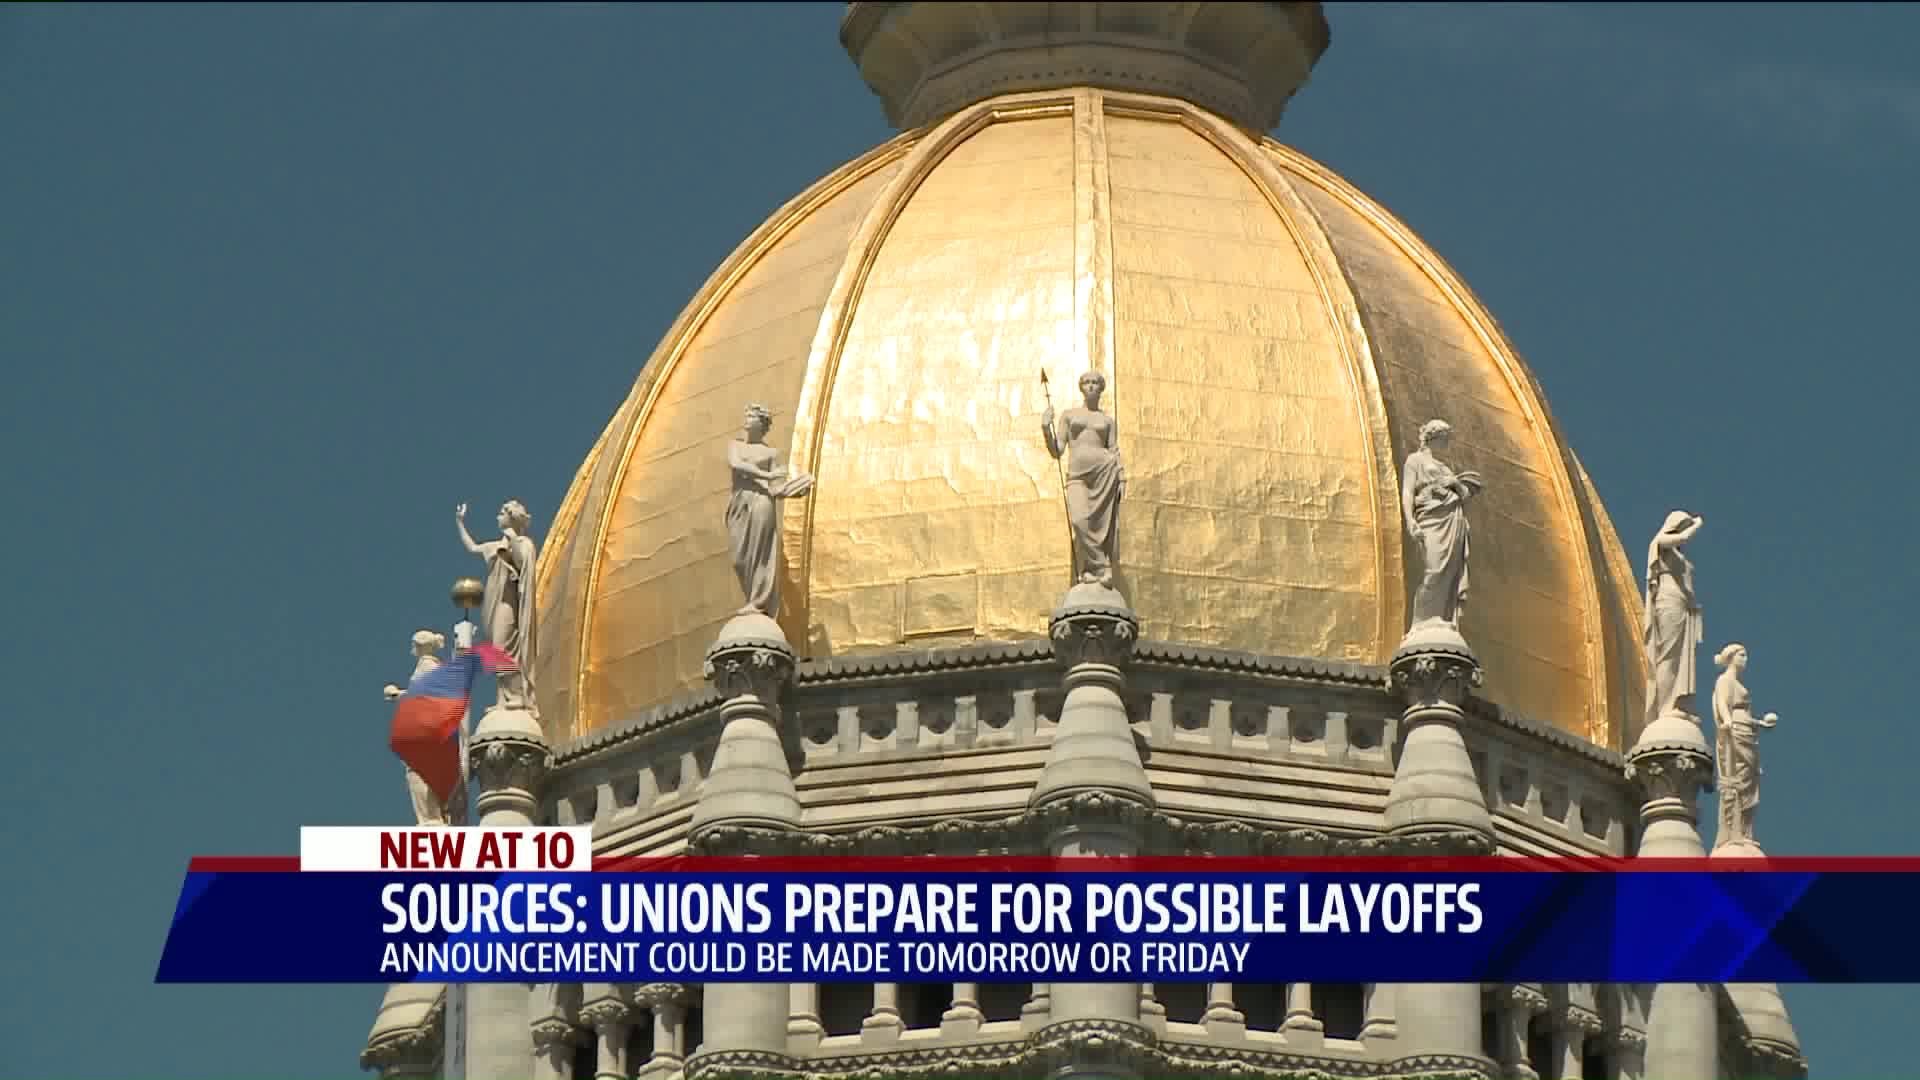 Sources: Unions prepare for possible layoffs announcement this week